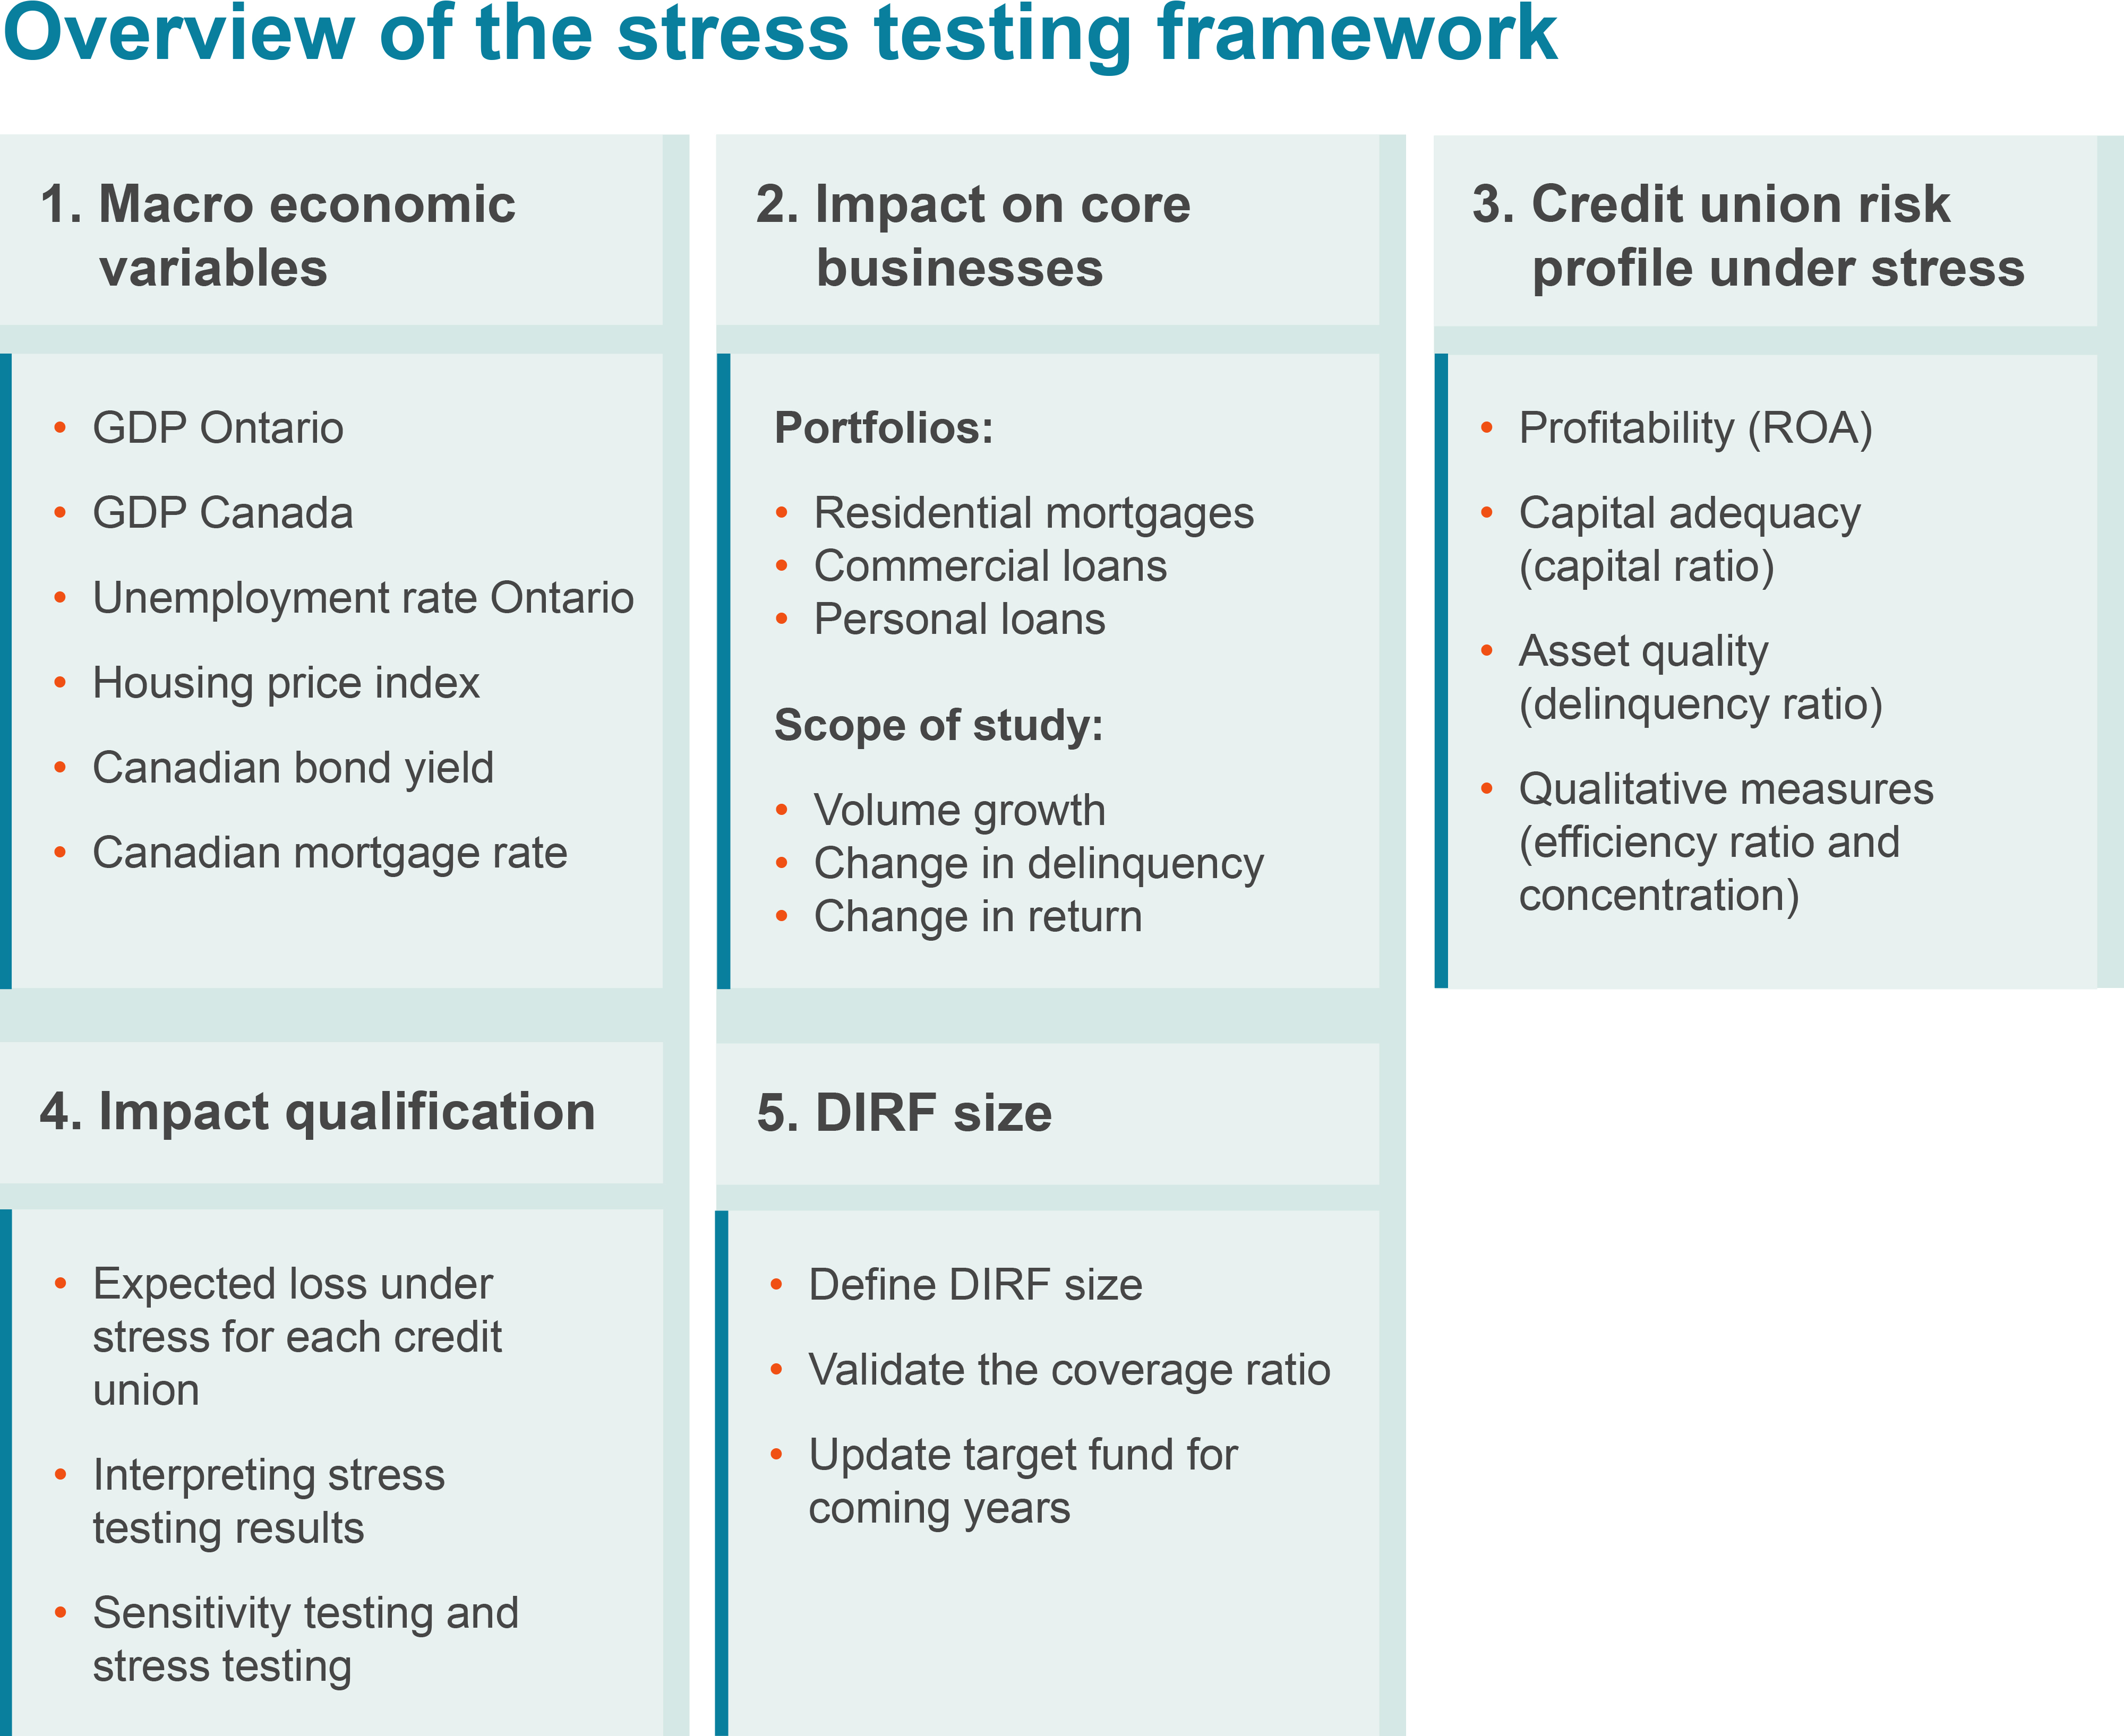 Overview of the stress testing framework